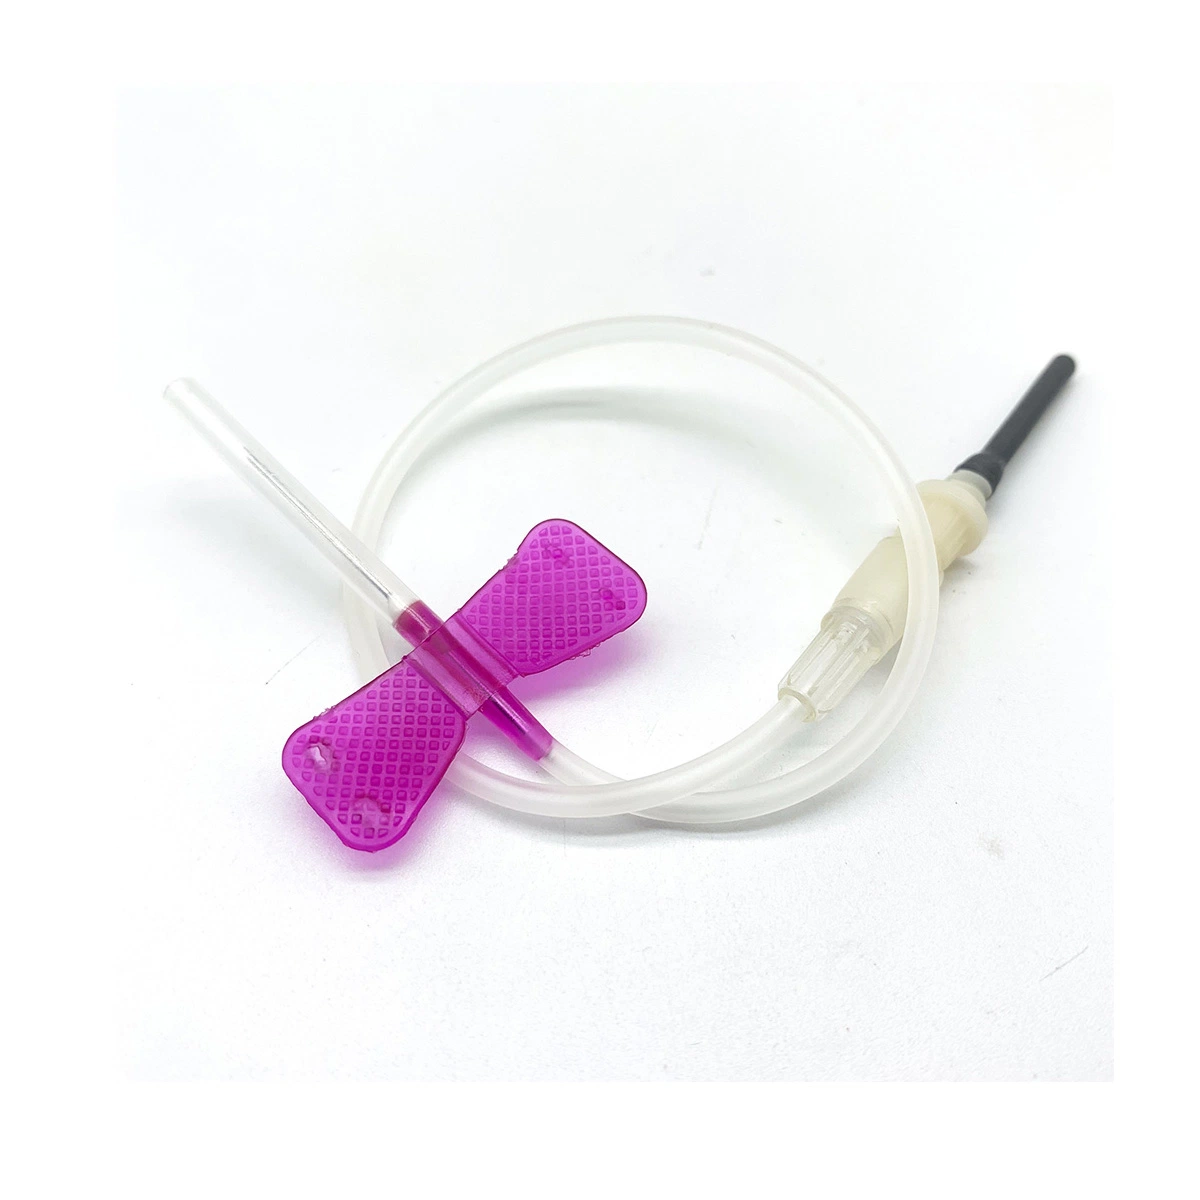 Medical Safety 21g Butterfly Needle for Blood Collection